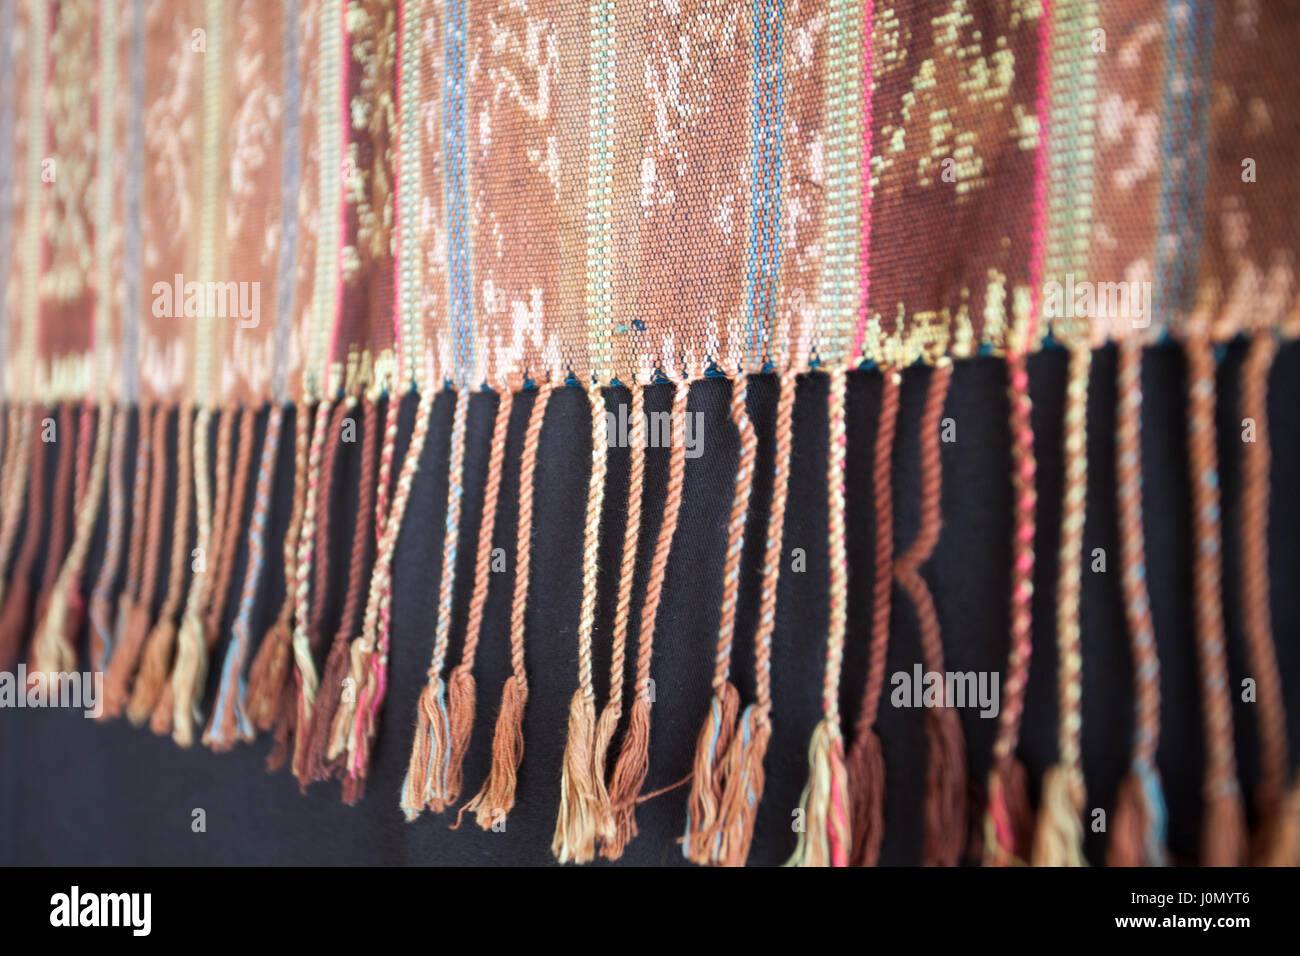 Traditional Indonesian and Asian pattern on fabric with brushes closeup and details Stock Photo